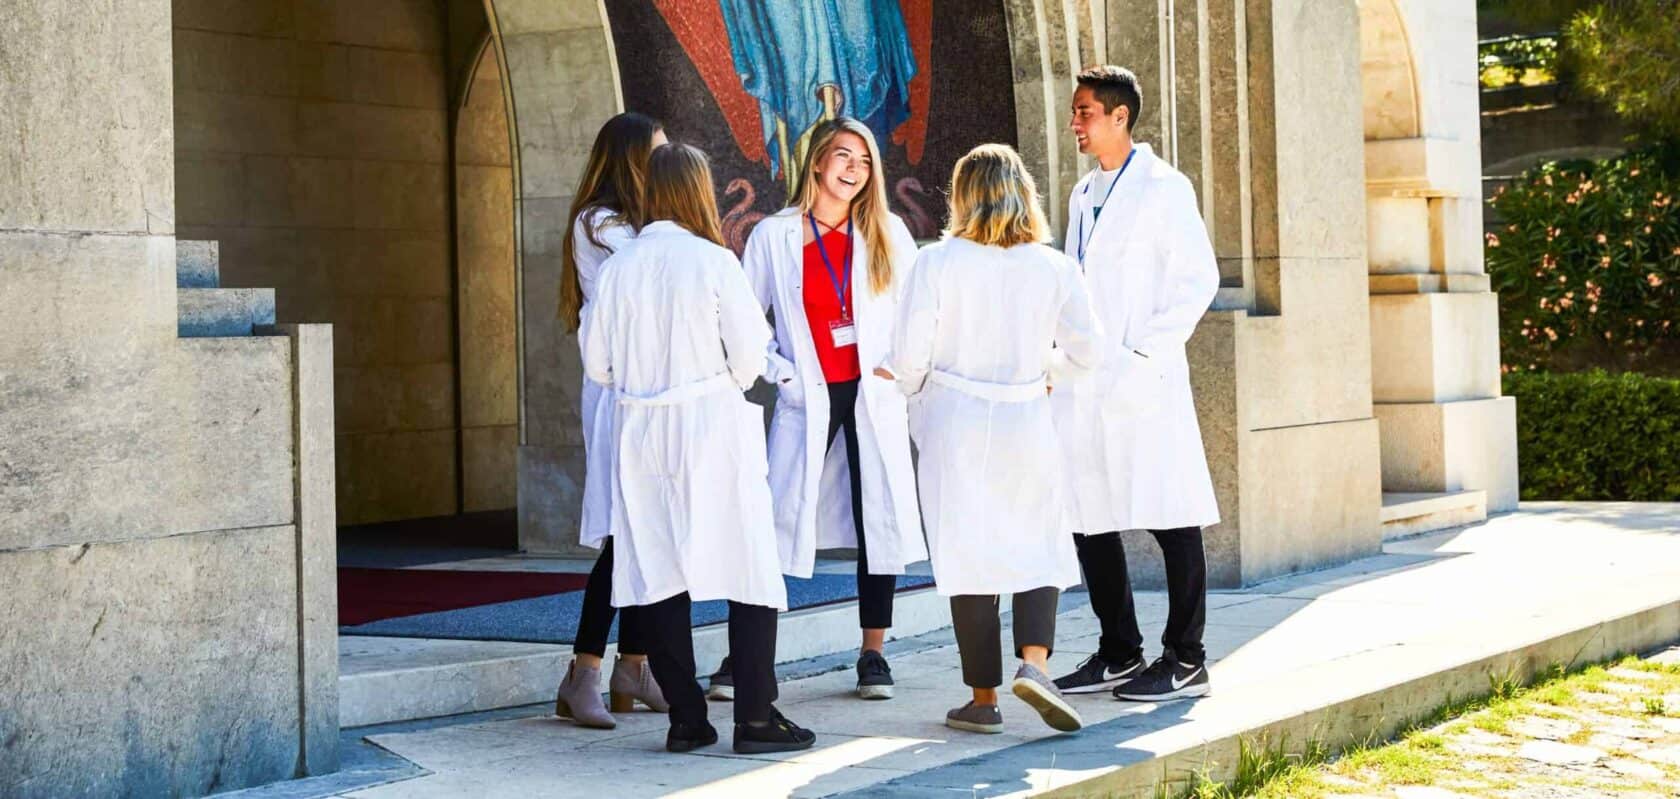 Atlantis – Shadowing Experiences for Pre-Med Students